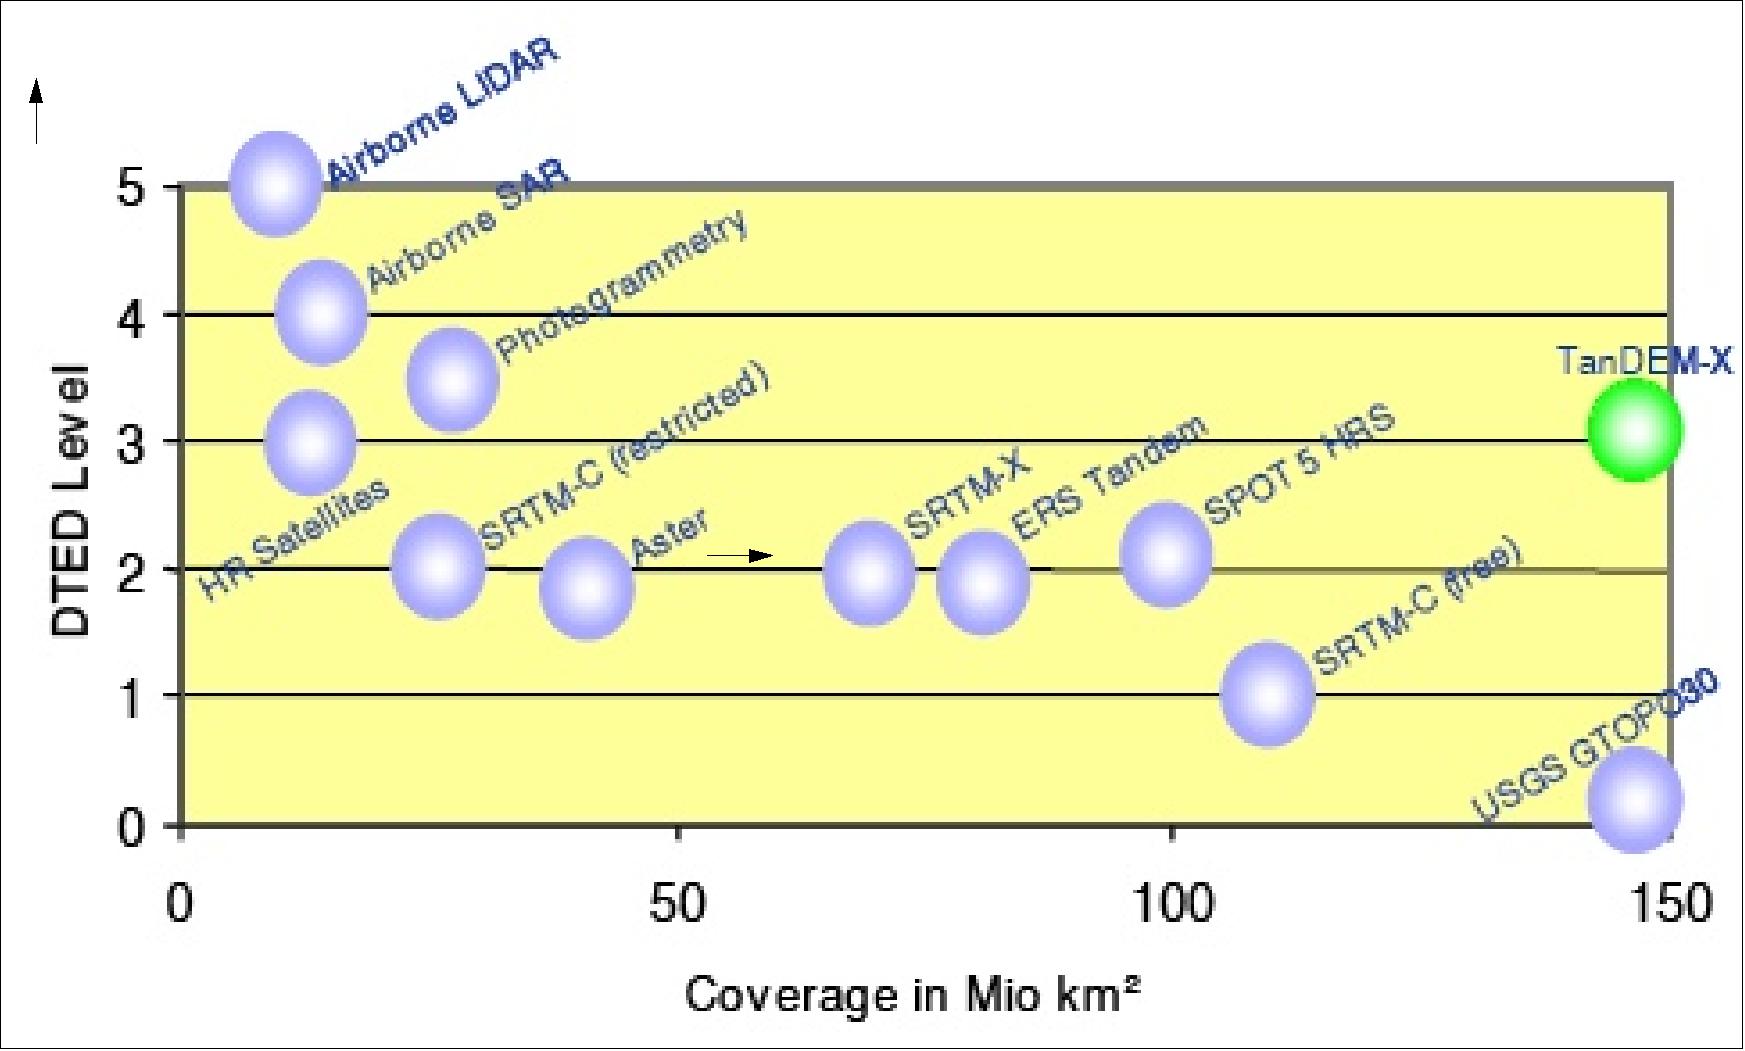 Figure 1: DEM-level versus coverage indicating the uniqueness of the global TanDEM-X HRTI-3 product (image credit: DLR)